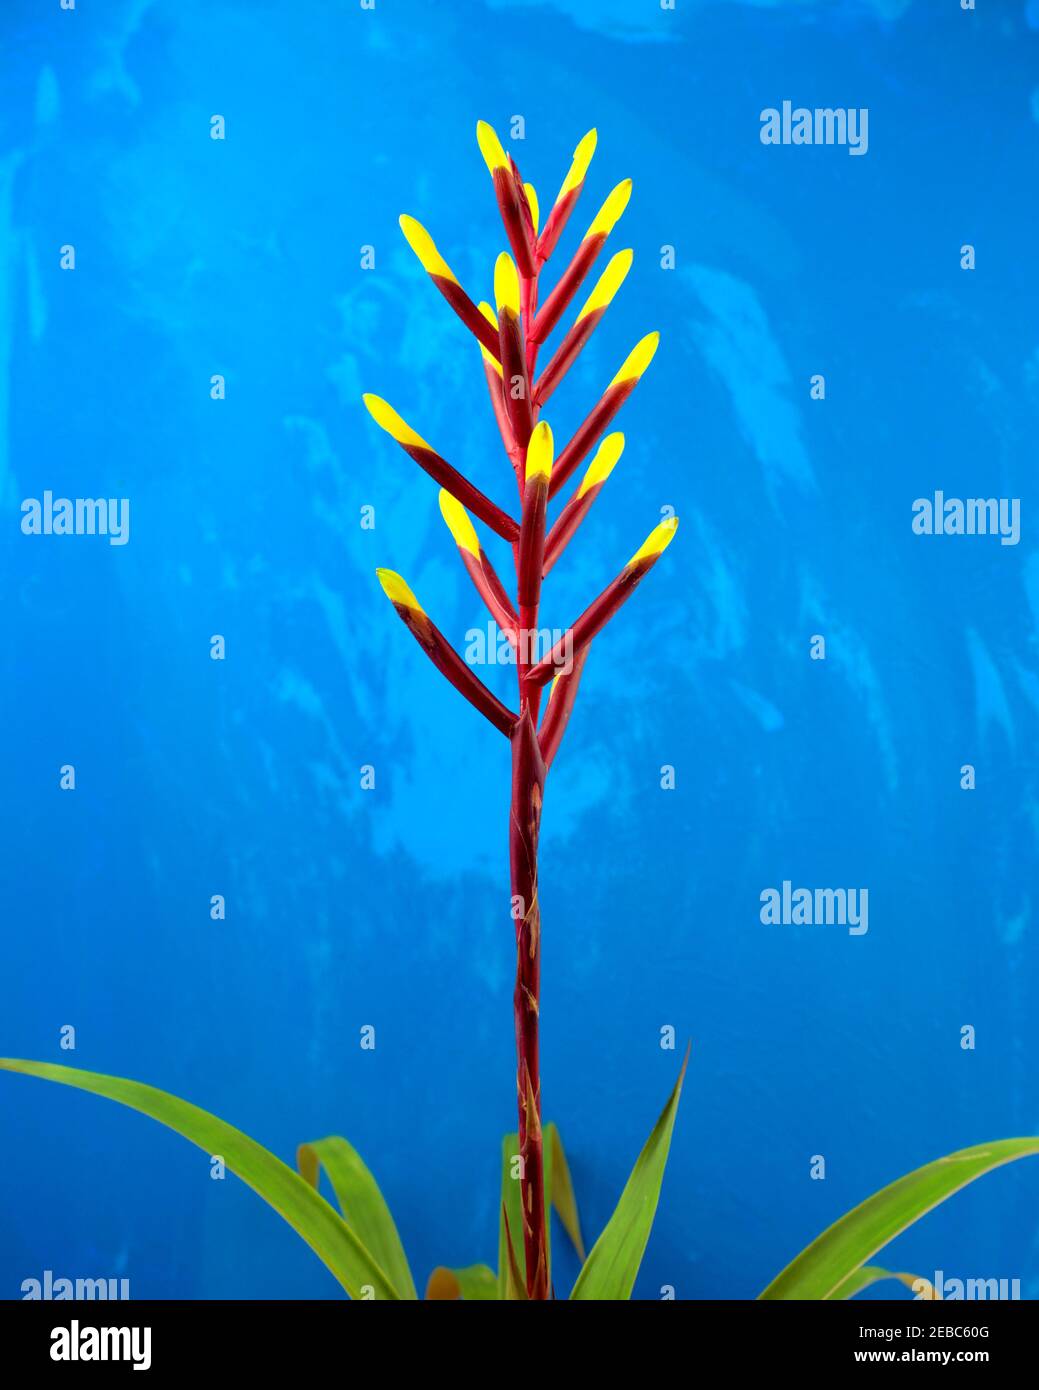 Bromeliads, Bromeliaceae, Aechmea. Vibrant tropical plant with dark magenta stem, branch and yellow petals. Isolated on blue grunge background. Stock Photo